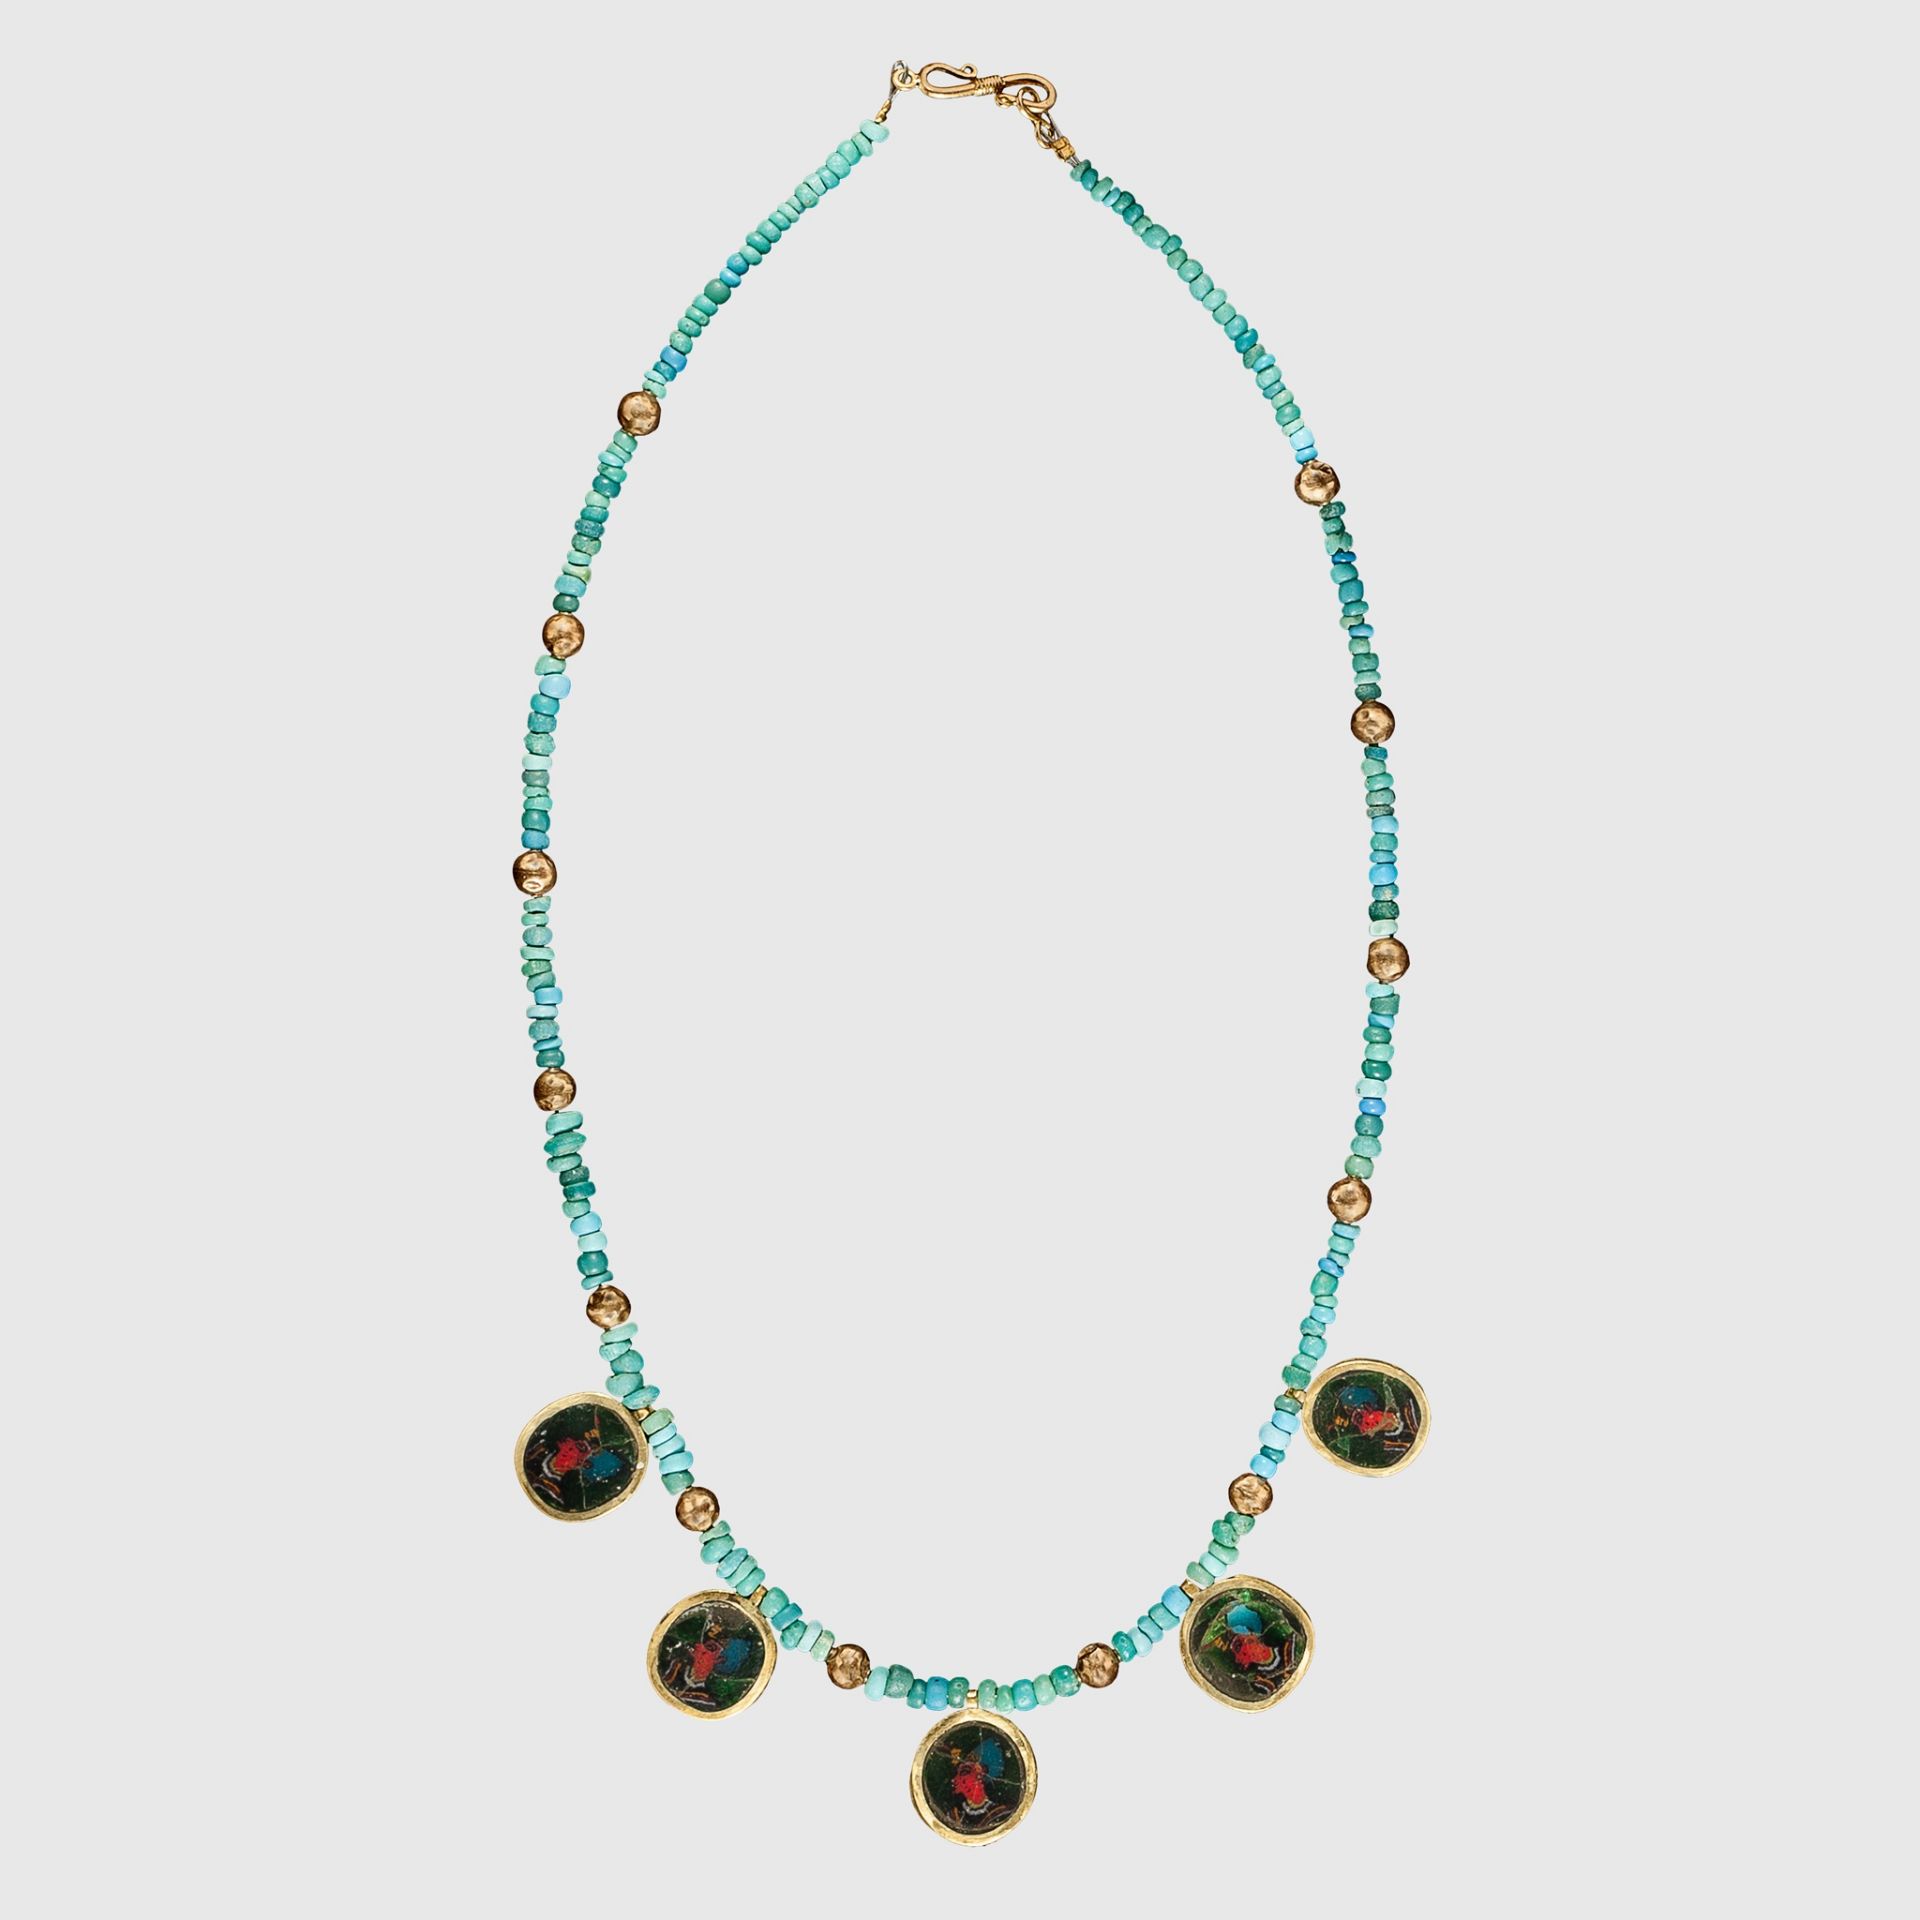 ANCIENT EGYPTIAN PHARAOH MOSAIC NECKLACE EGYPT, PTOLEMAIC PERIOD, 2ND - 1ST CENTURY B.C.